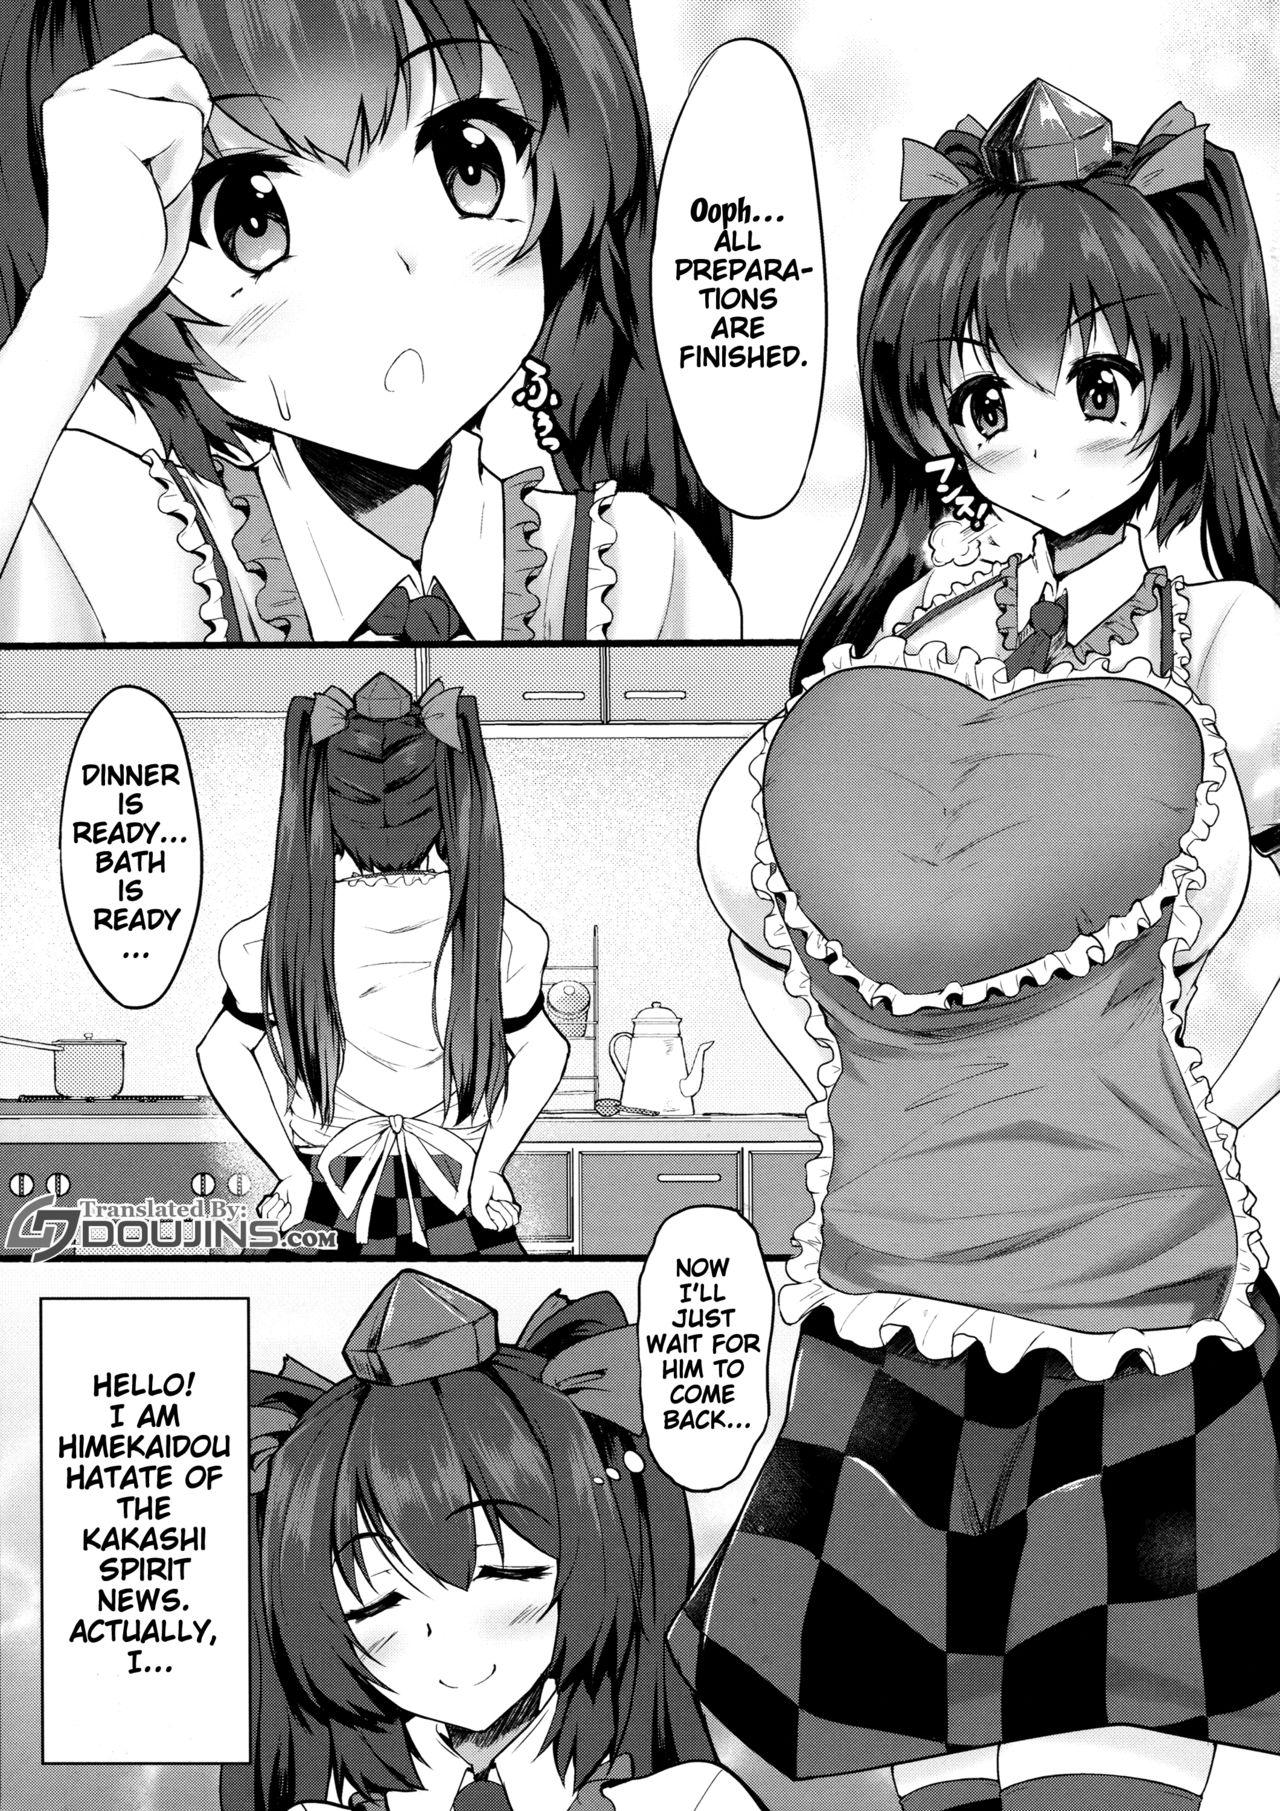 Super My Sweet Honey Hatate - Touhou project Asian Babes - Page 2